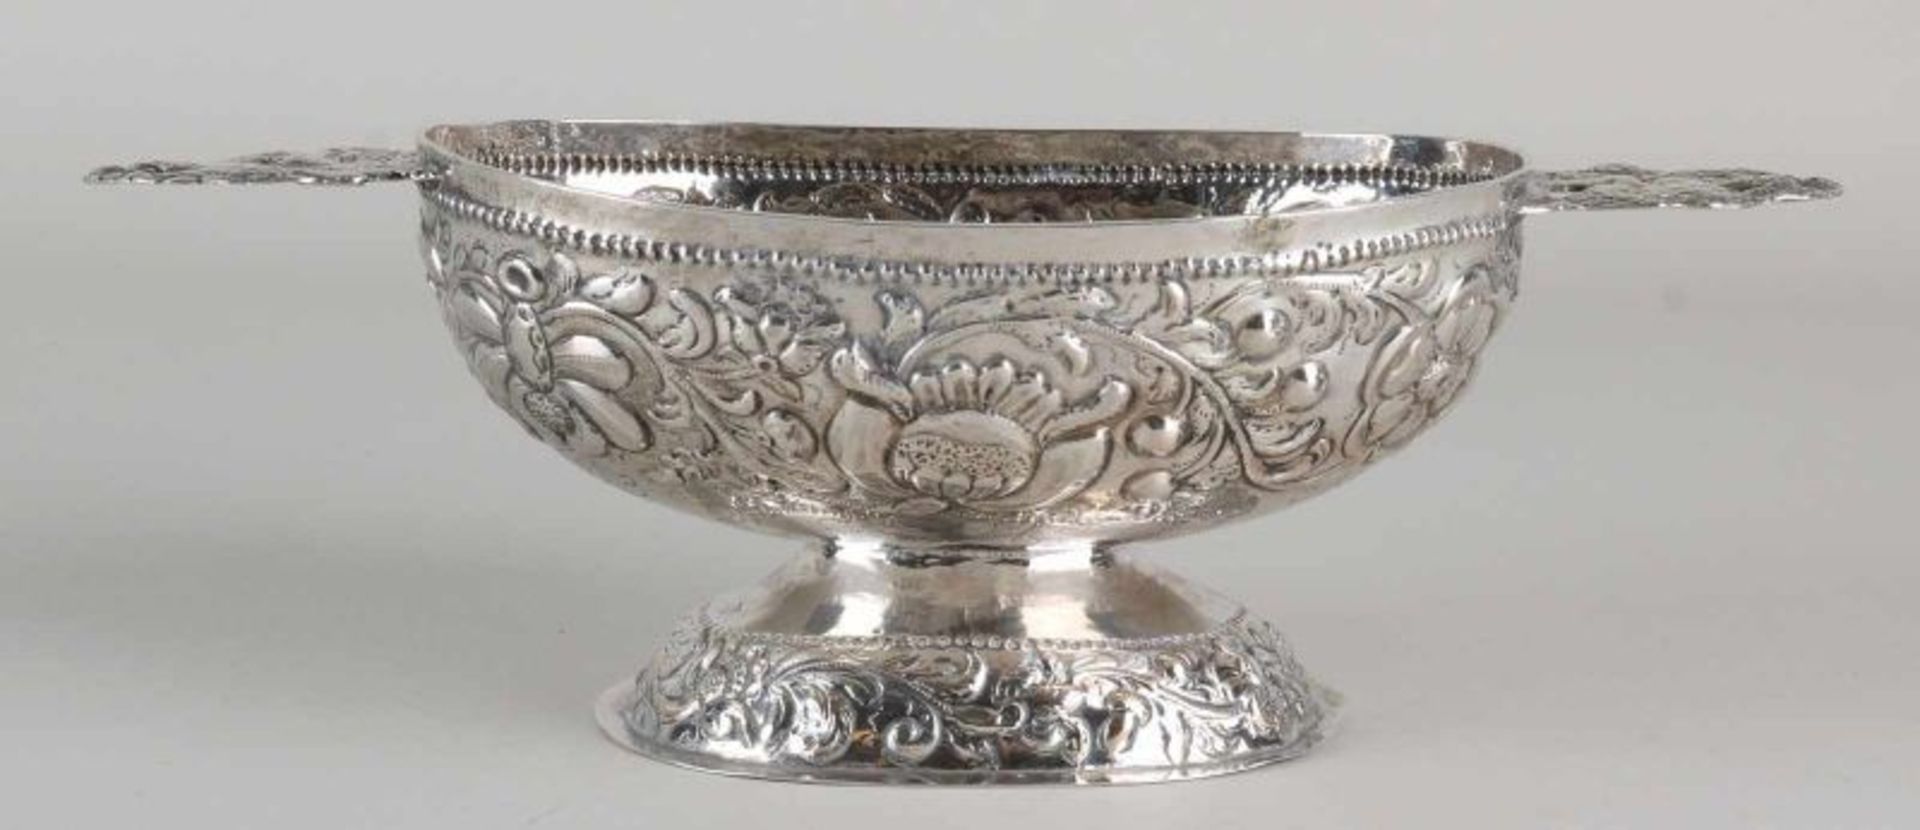 Frisian silver brandy bowl, 18th century, decorated with driven floral images, truss work and two - Bild 2 aus 2